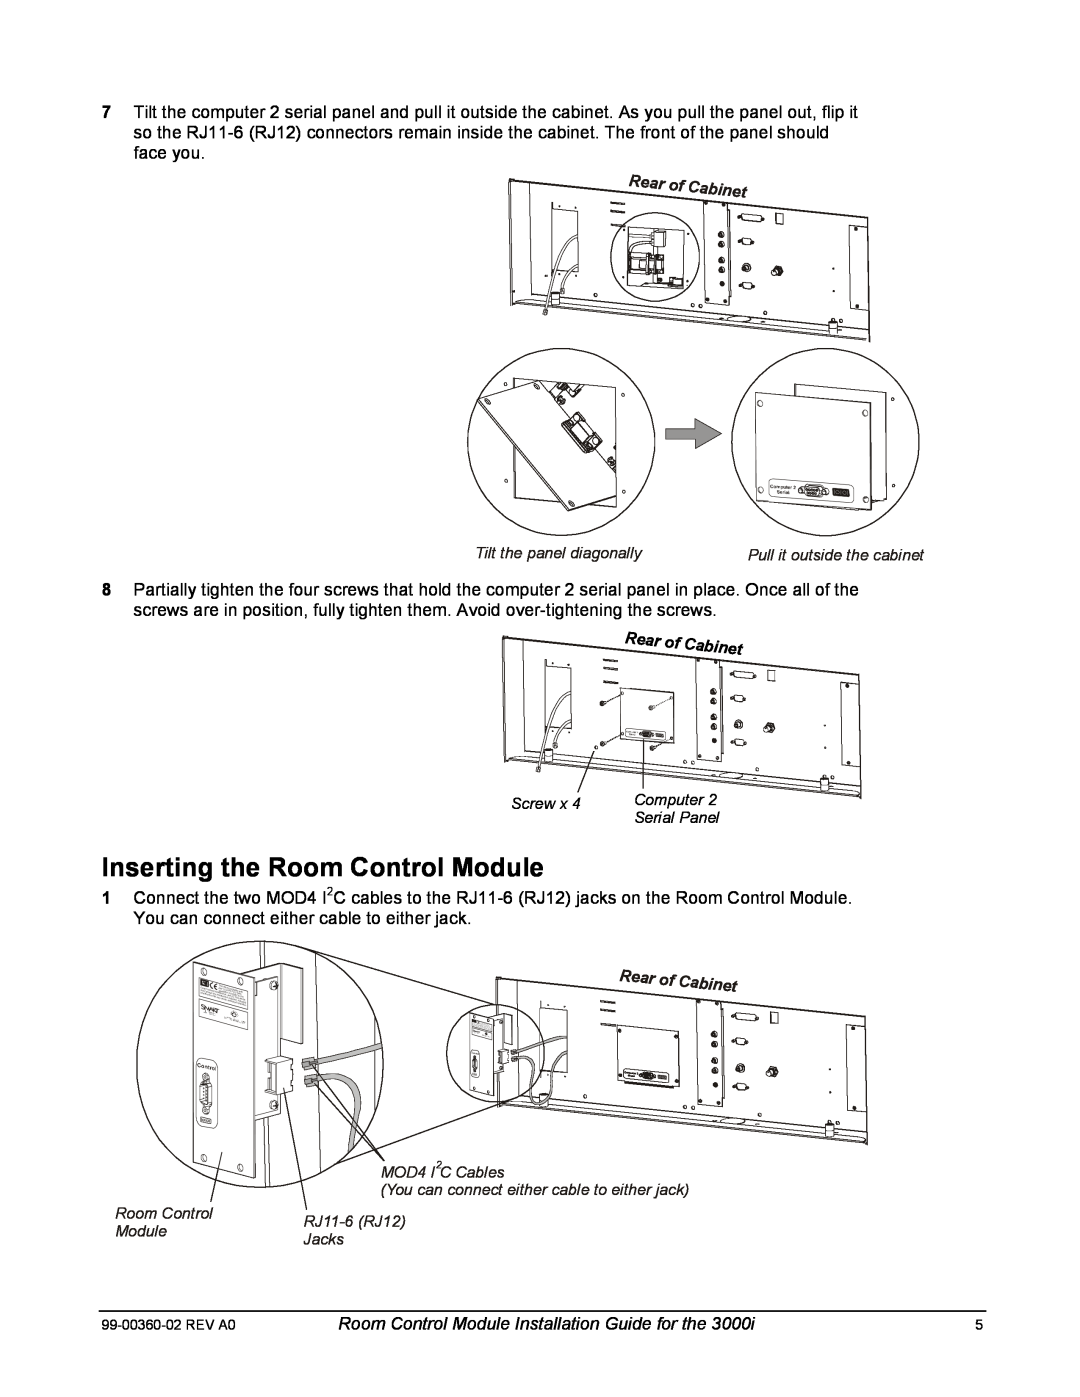 Smart Technologies 3000i manual Inserting the Room Control Module, Rear of Cabinet 